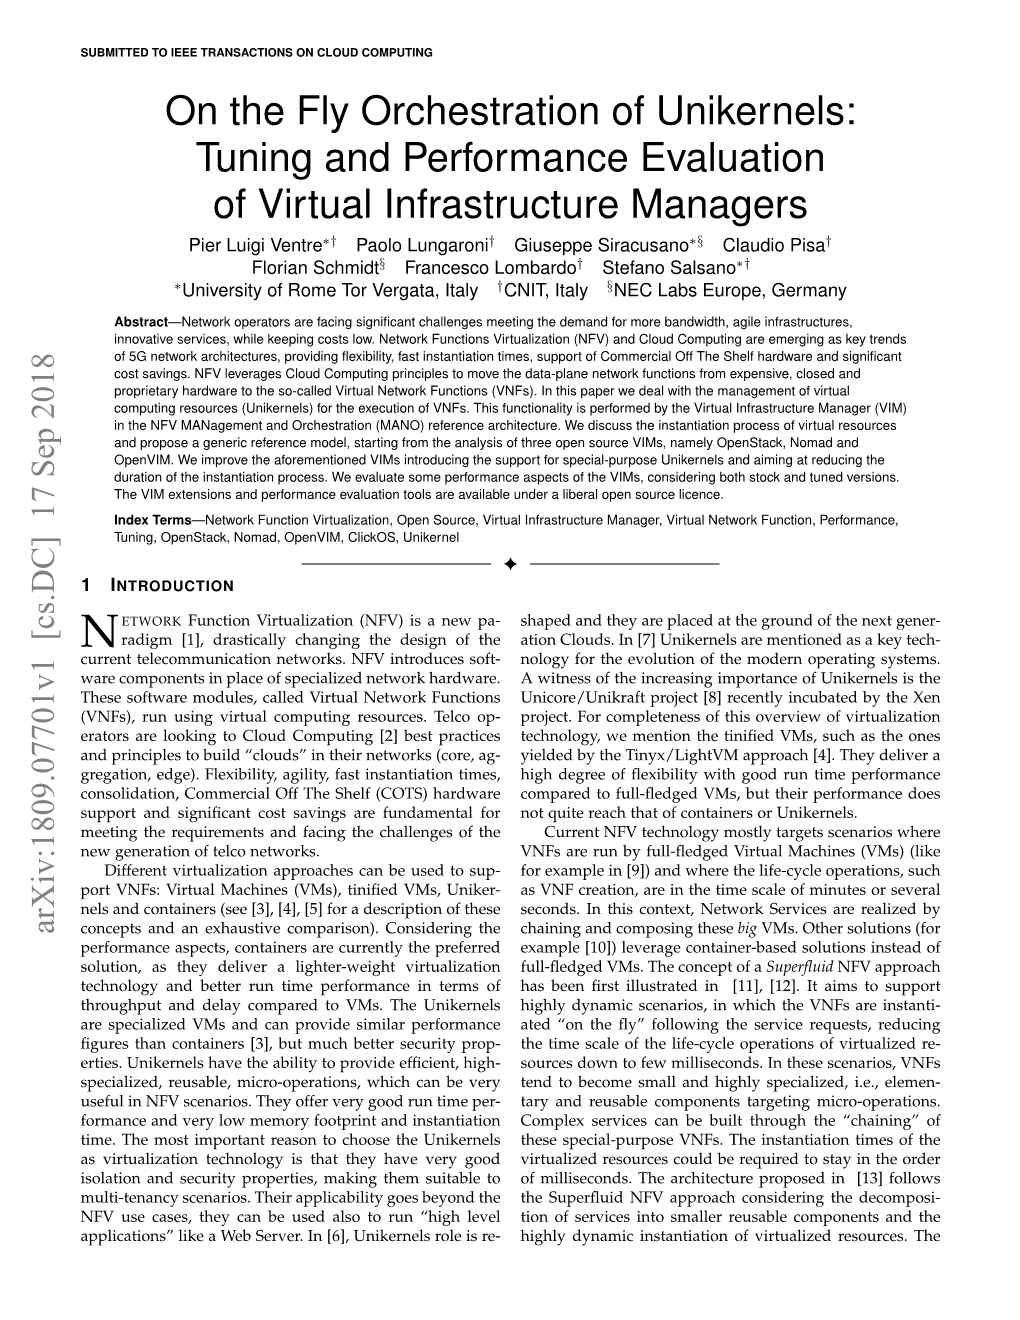 Tuning and Performance Evaluation of Virtual Infrastructure Managers